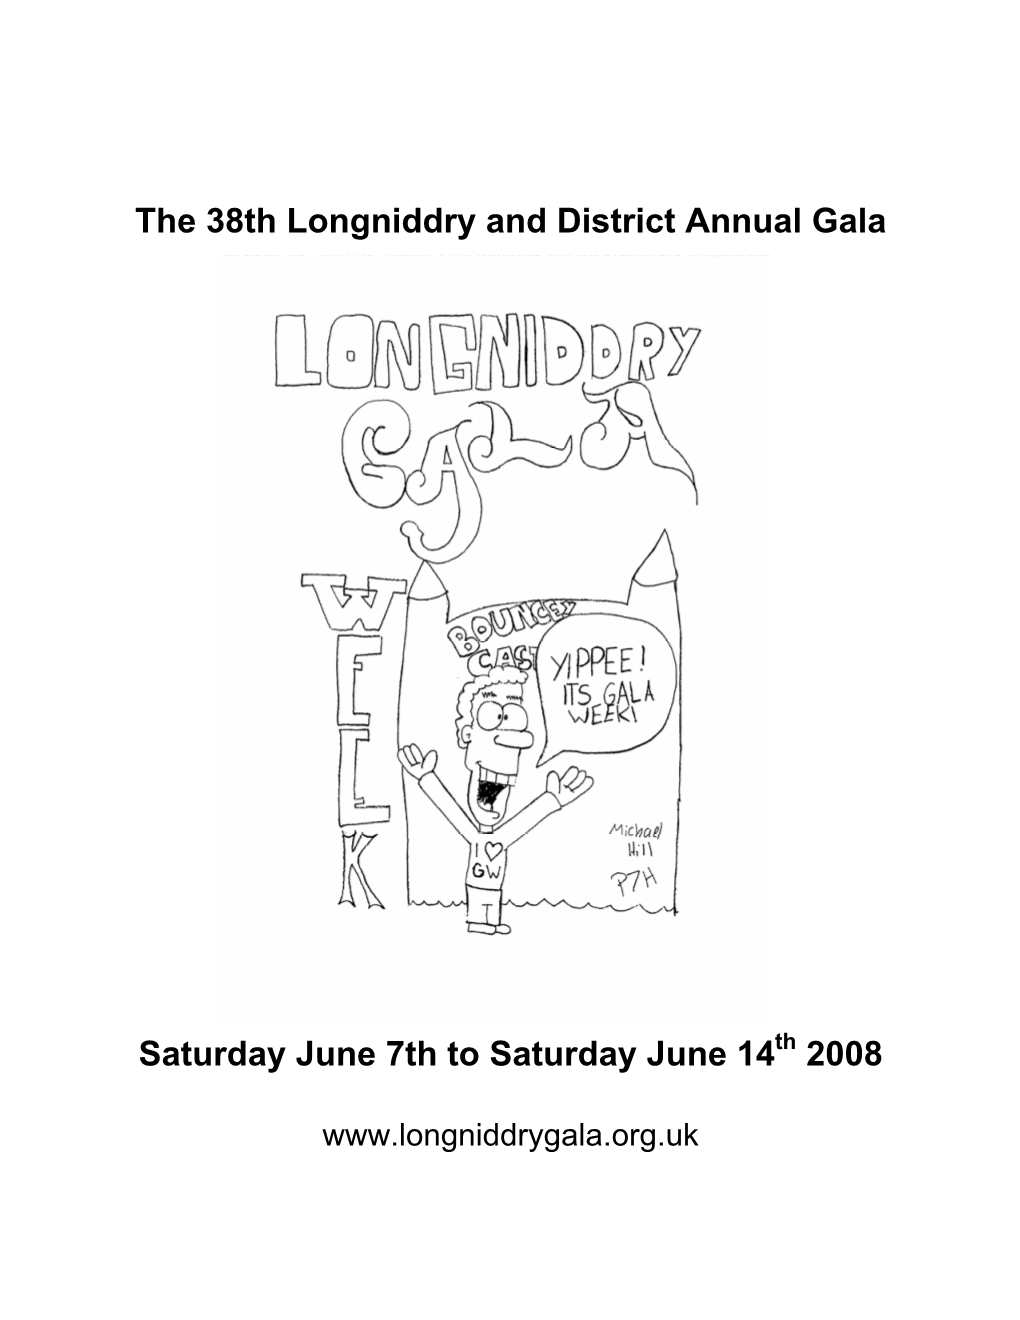 The 38Th Longniddry and District Annual Gala Saturday June 7Th To